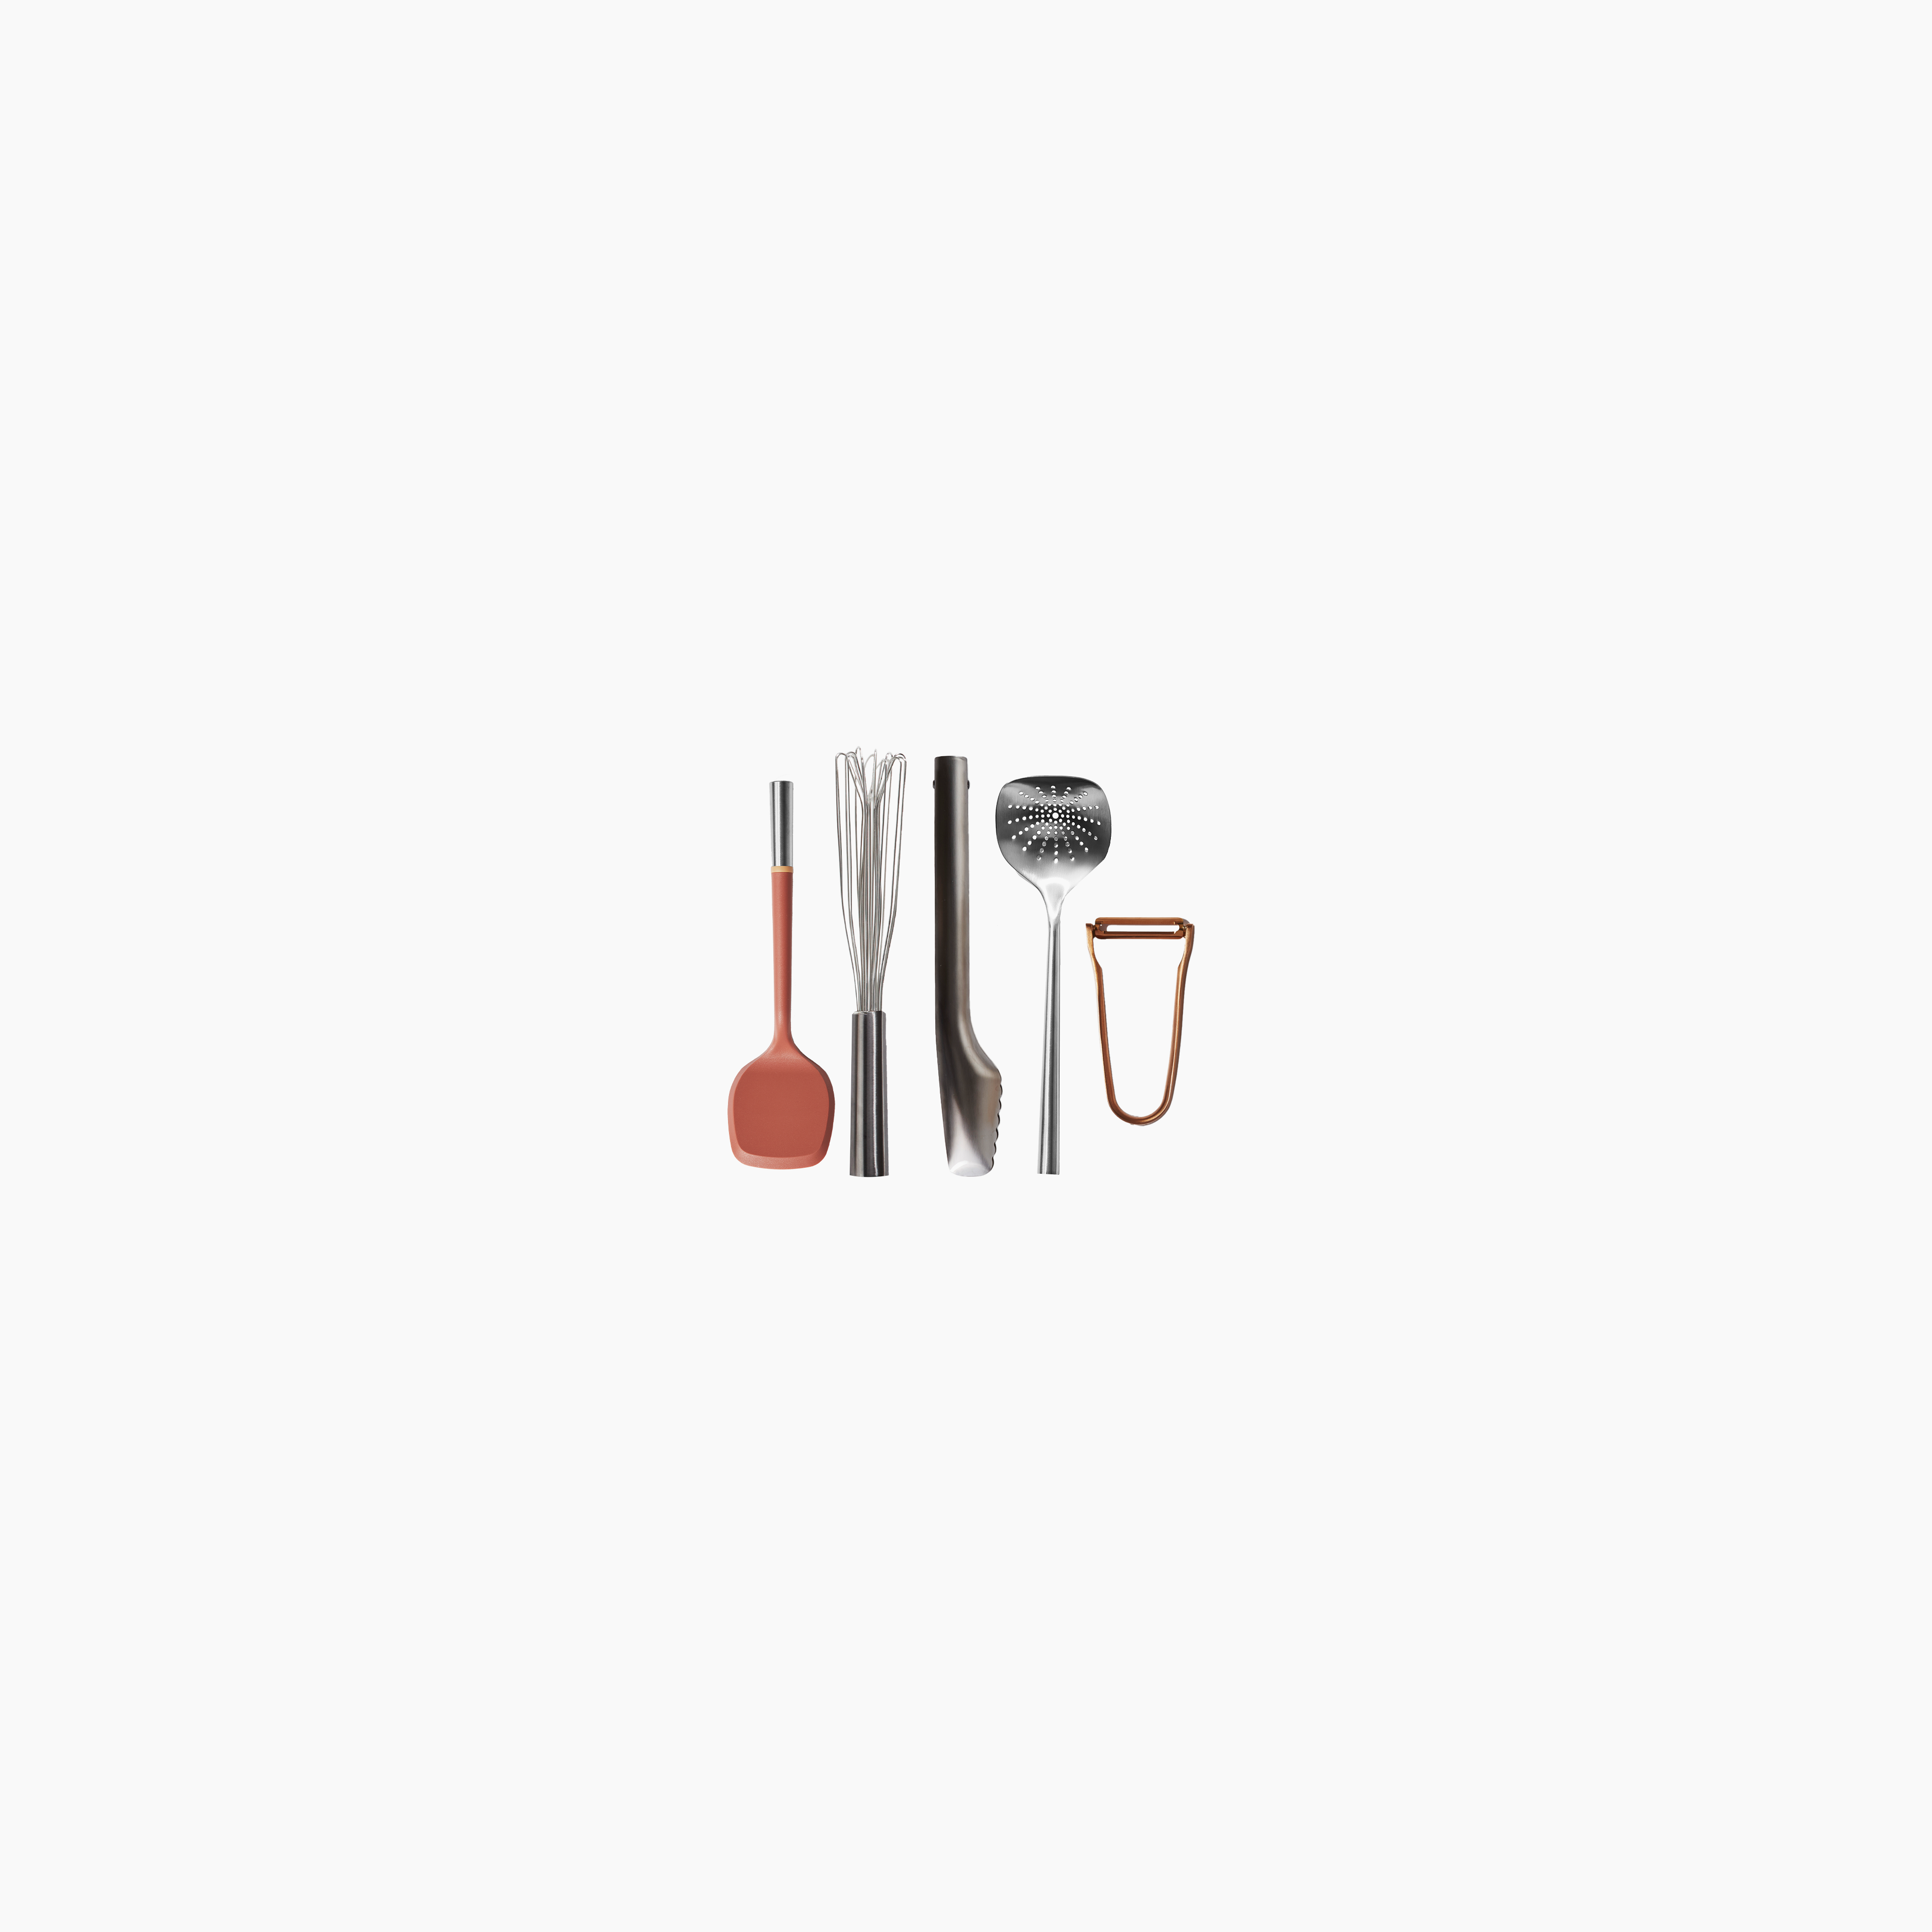 The Cook's Toolset